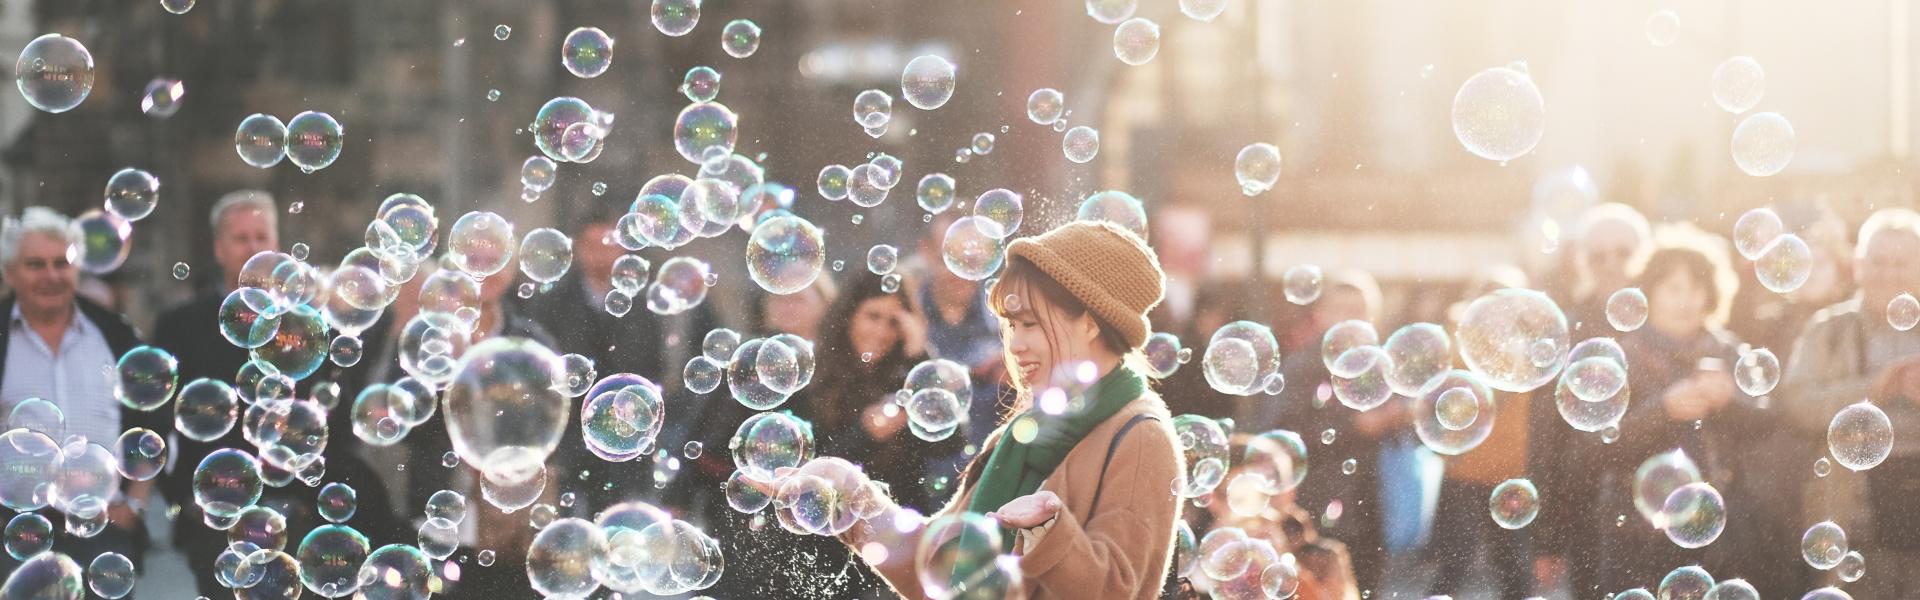 A woman standing in a crowd surrounded by bubbles.